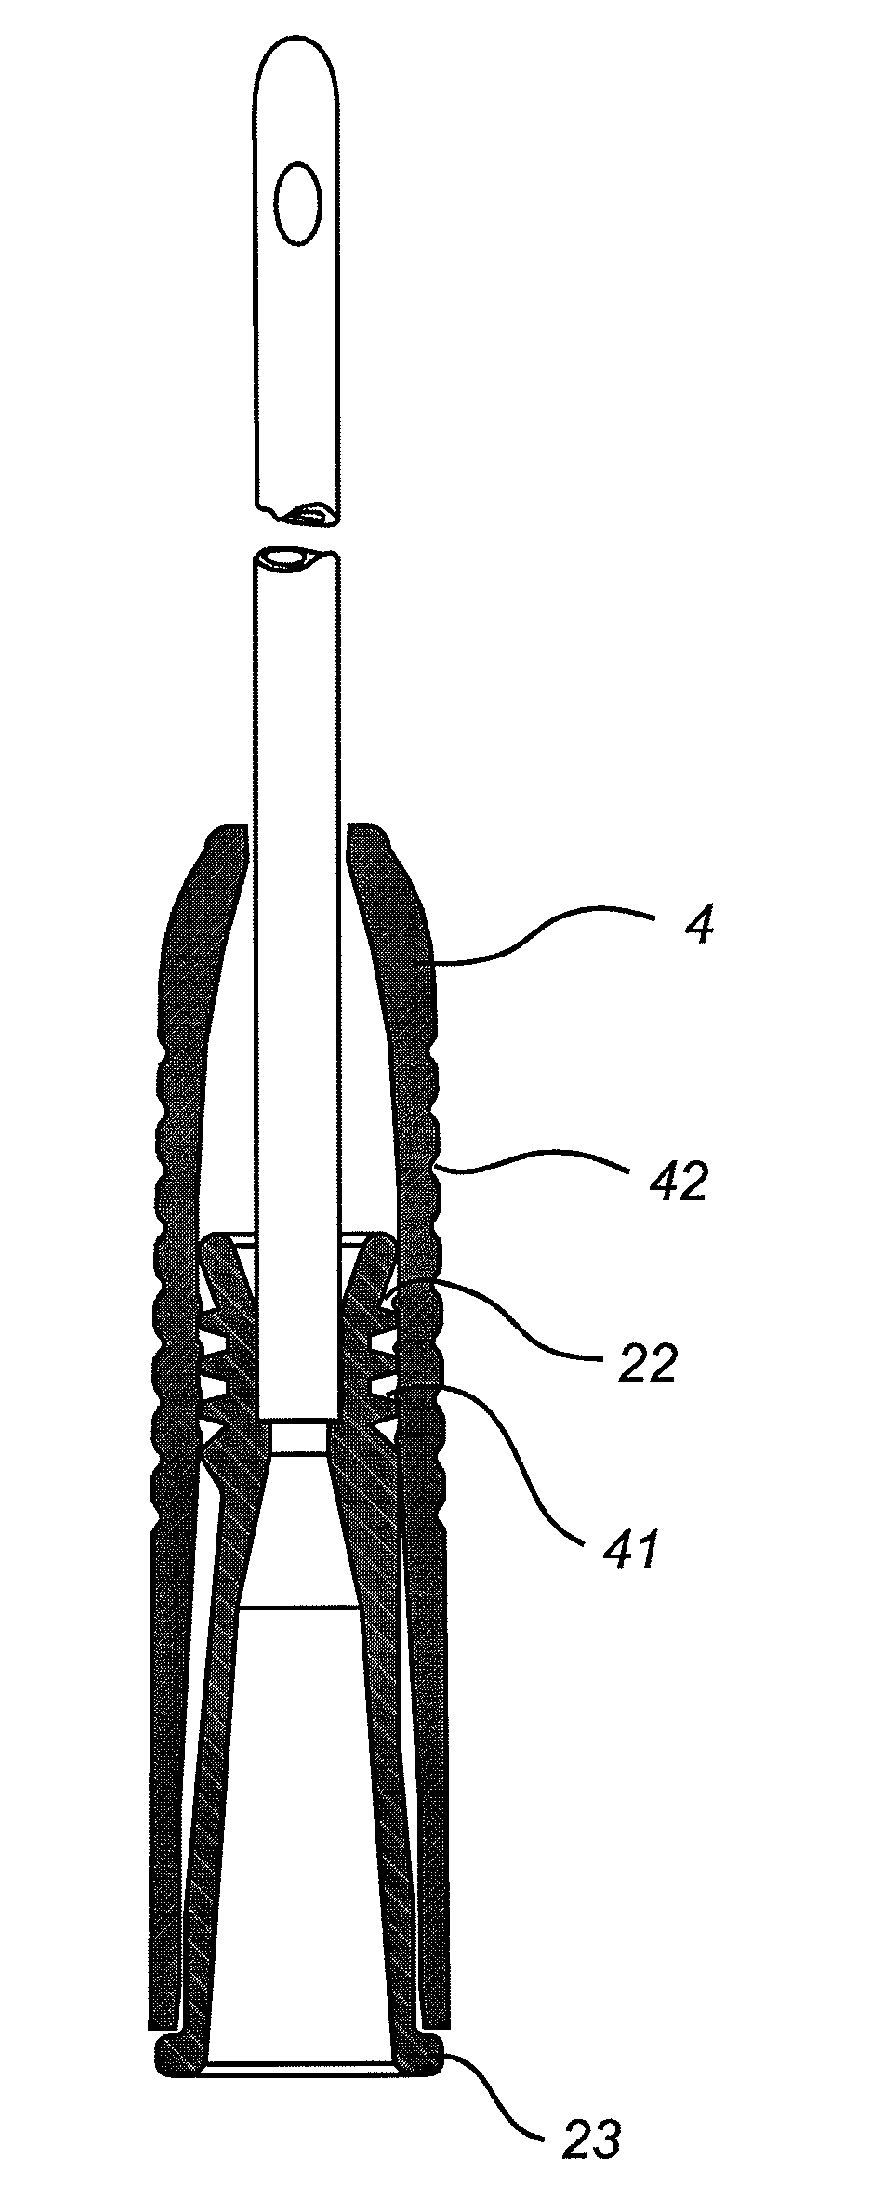 Catheter with customizable connector